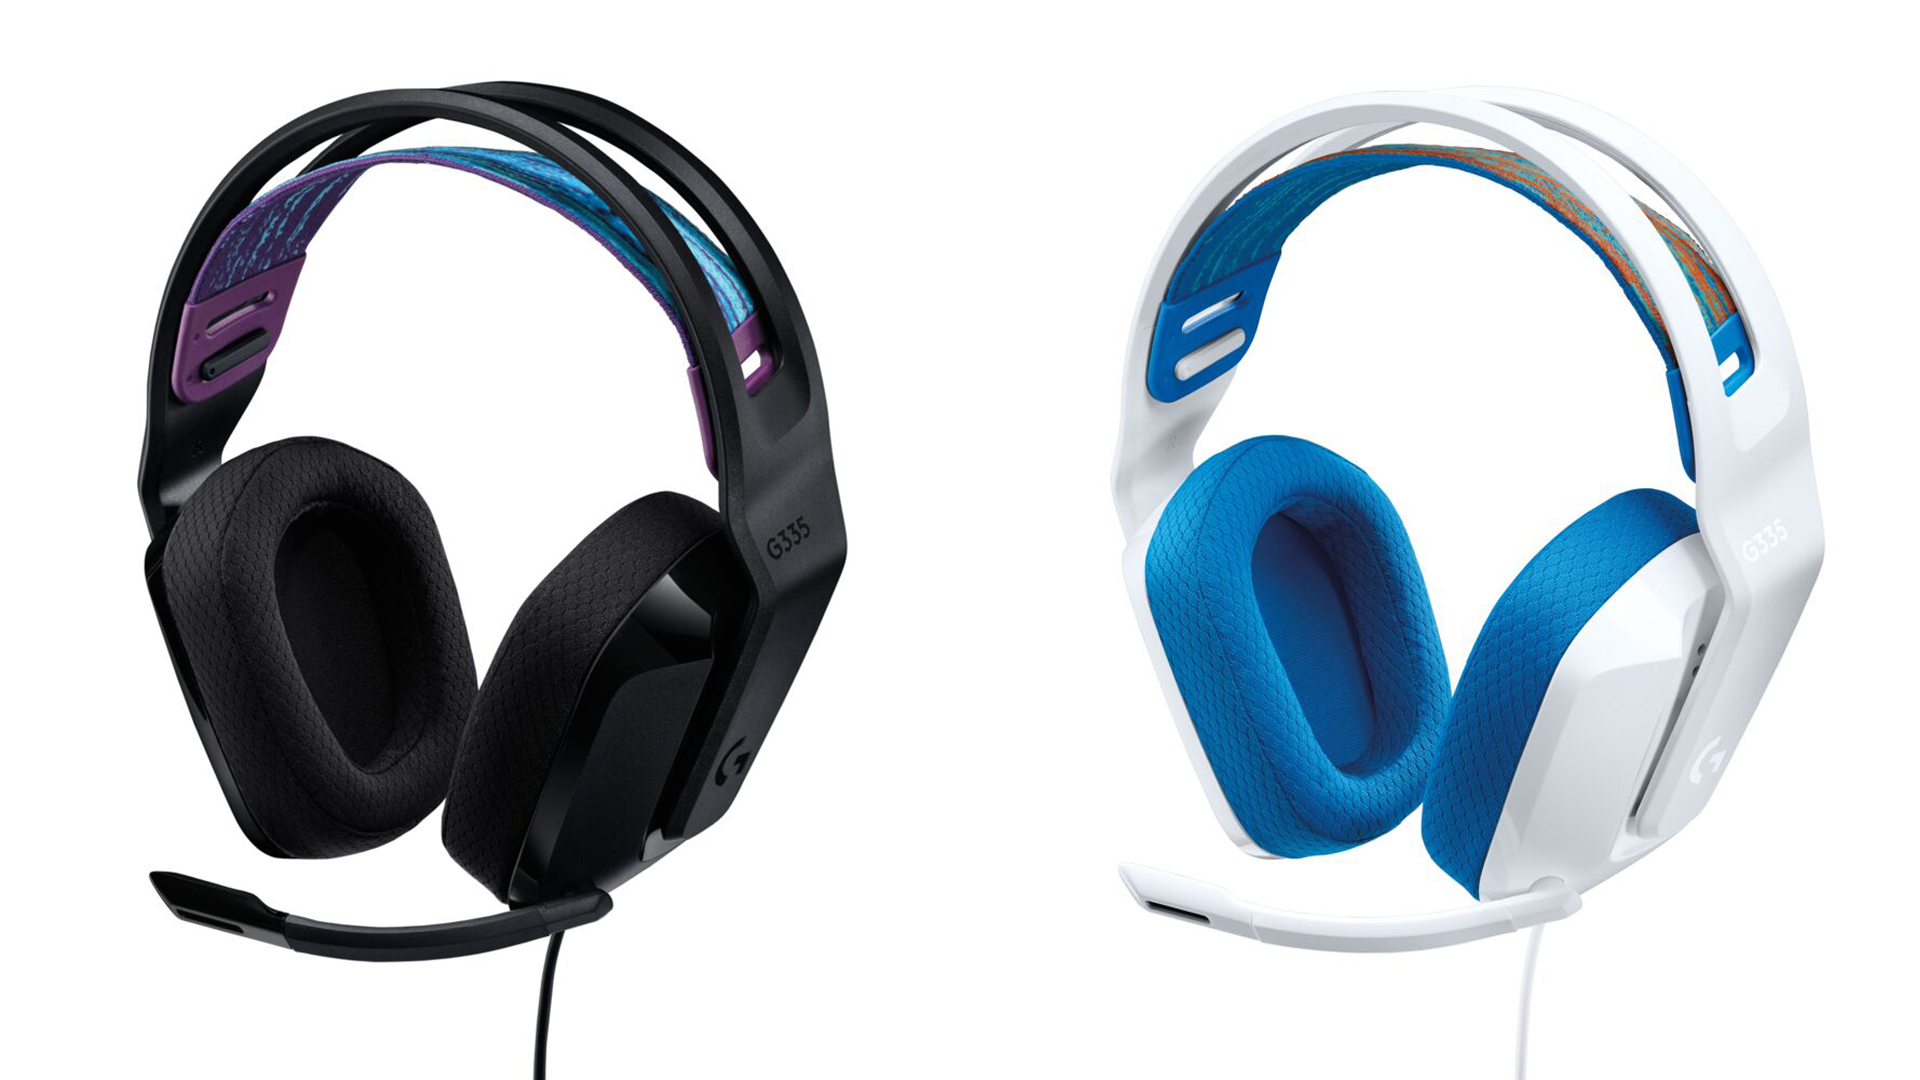 Logitech G335 wired gaming headset launched in India